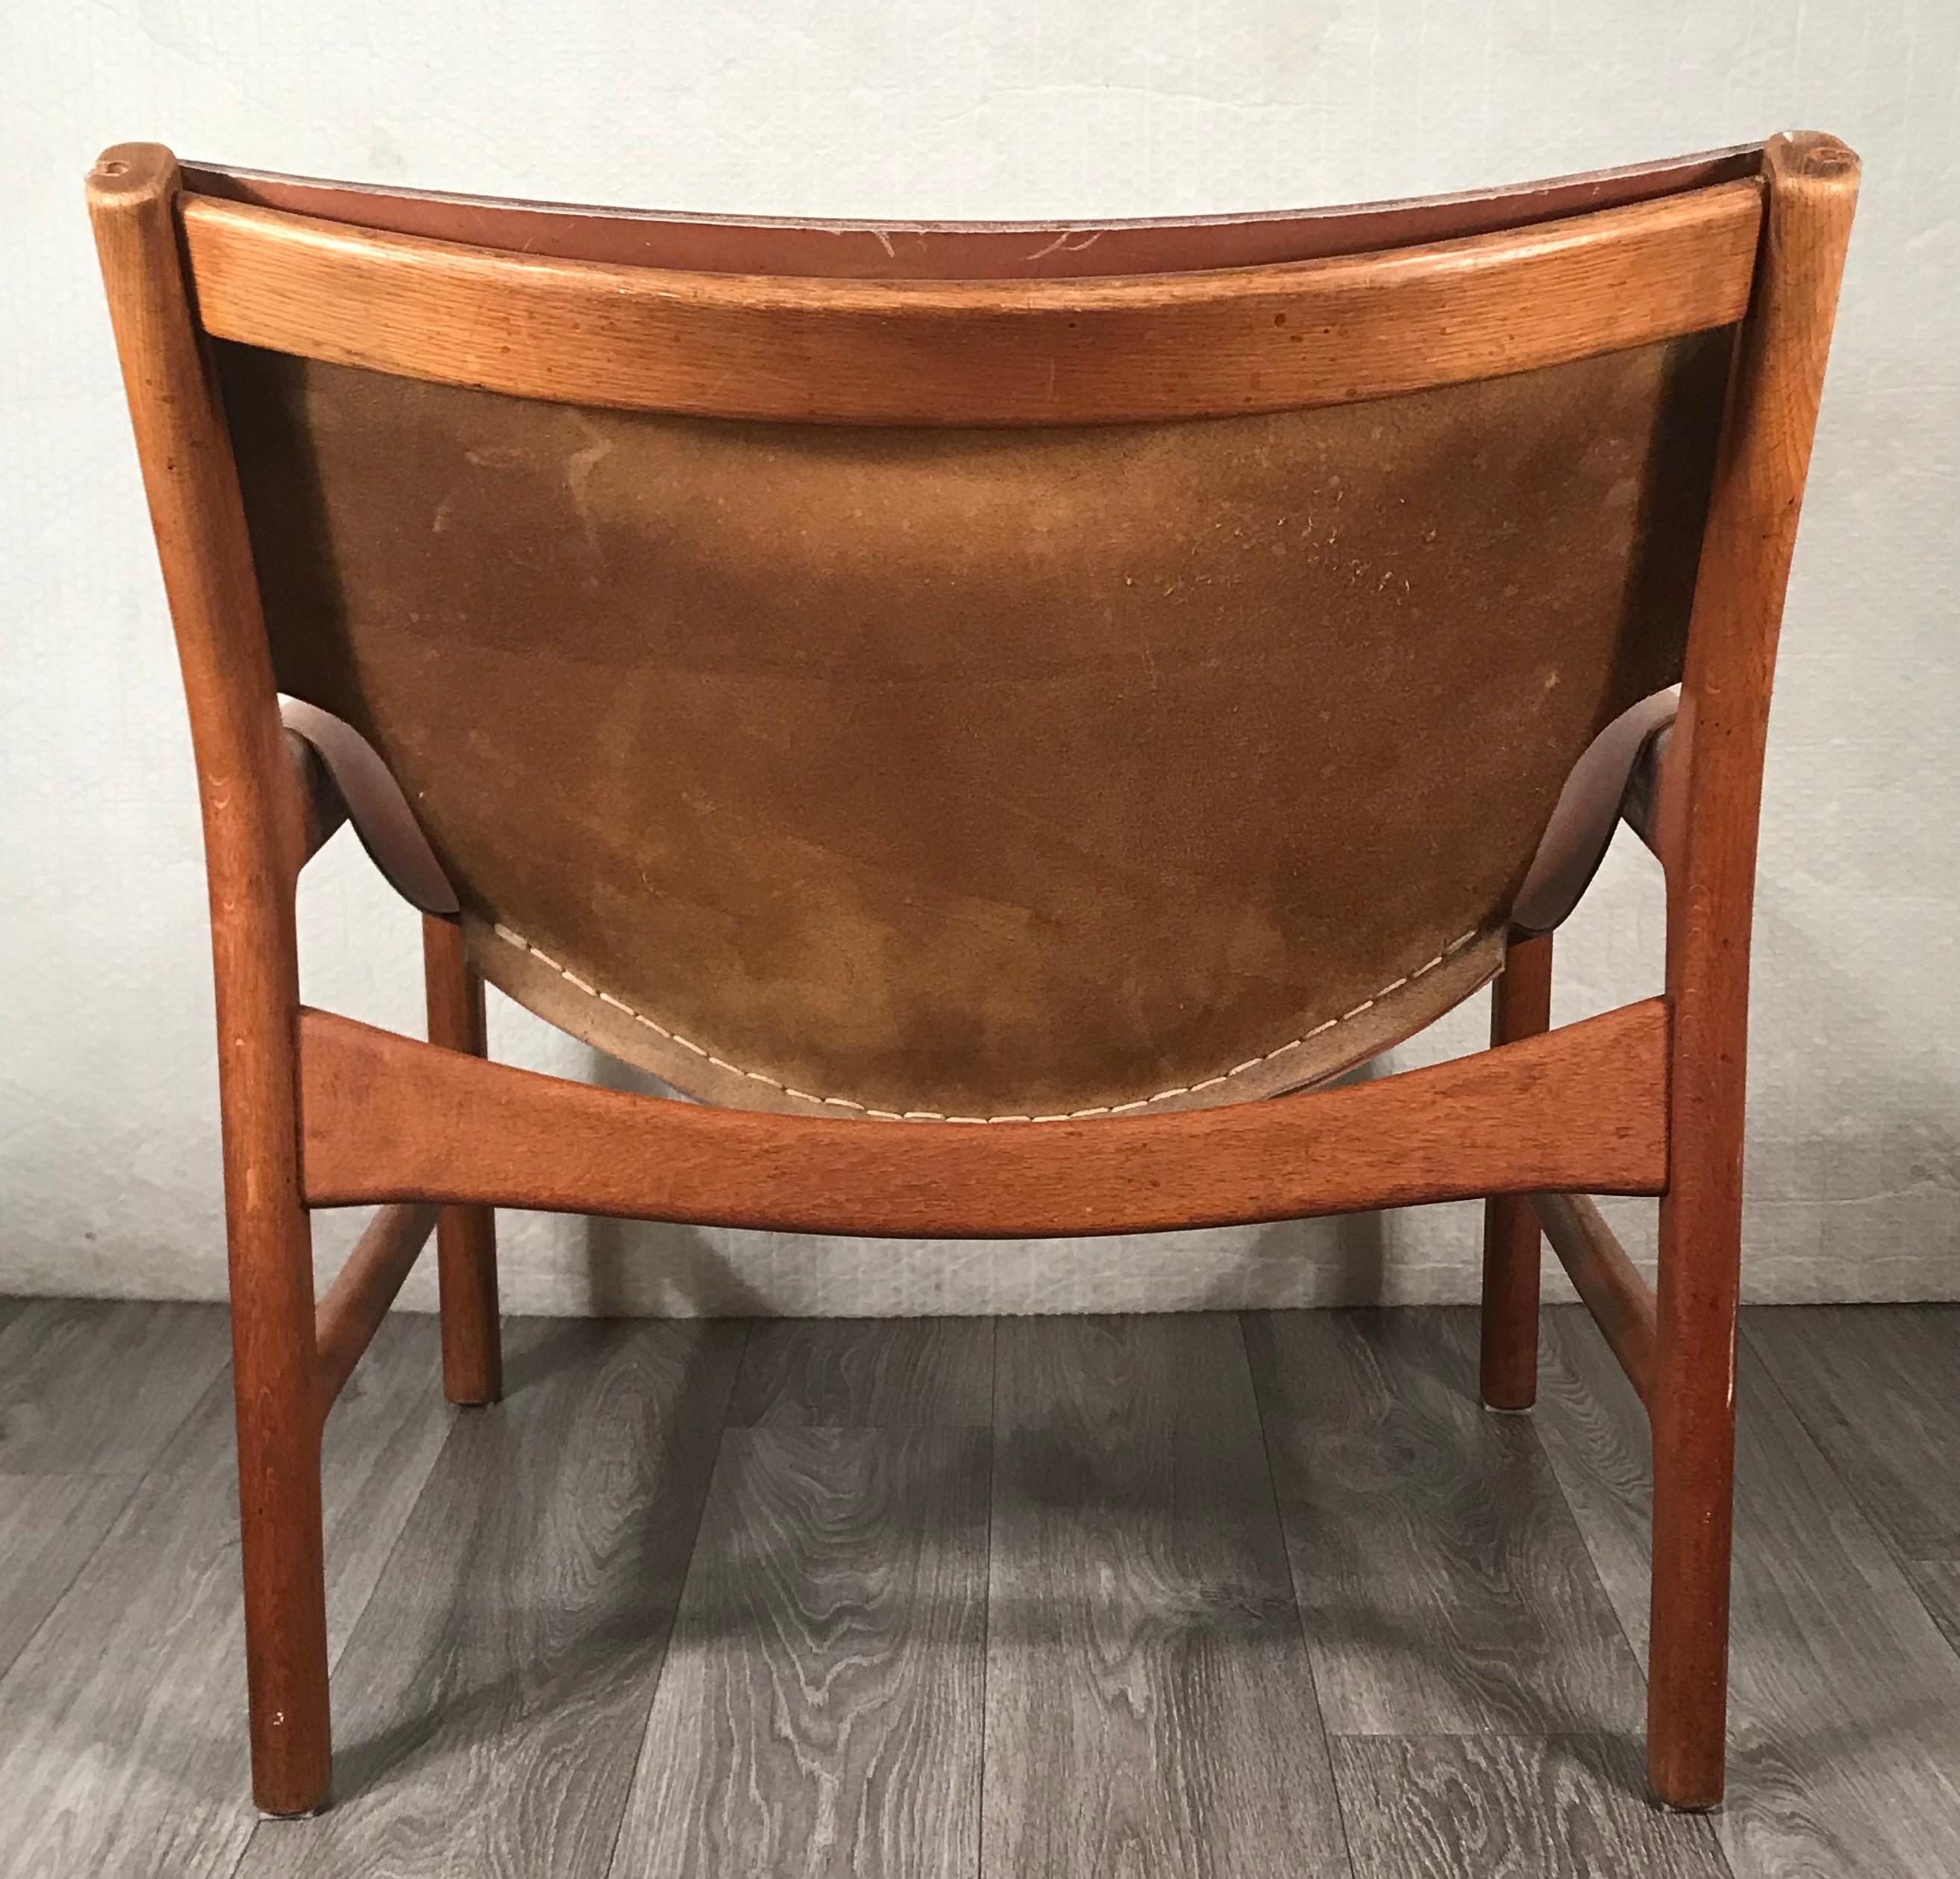 Illum Wikkelsø (1919-1999) for Mikael Laursen, easy chair model no.103, in cognac leather and teak. Made in Denmark in the late 1950s. 
The leather is attached to the wood frame of the chair and offers a very comfortable sitting experience.